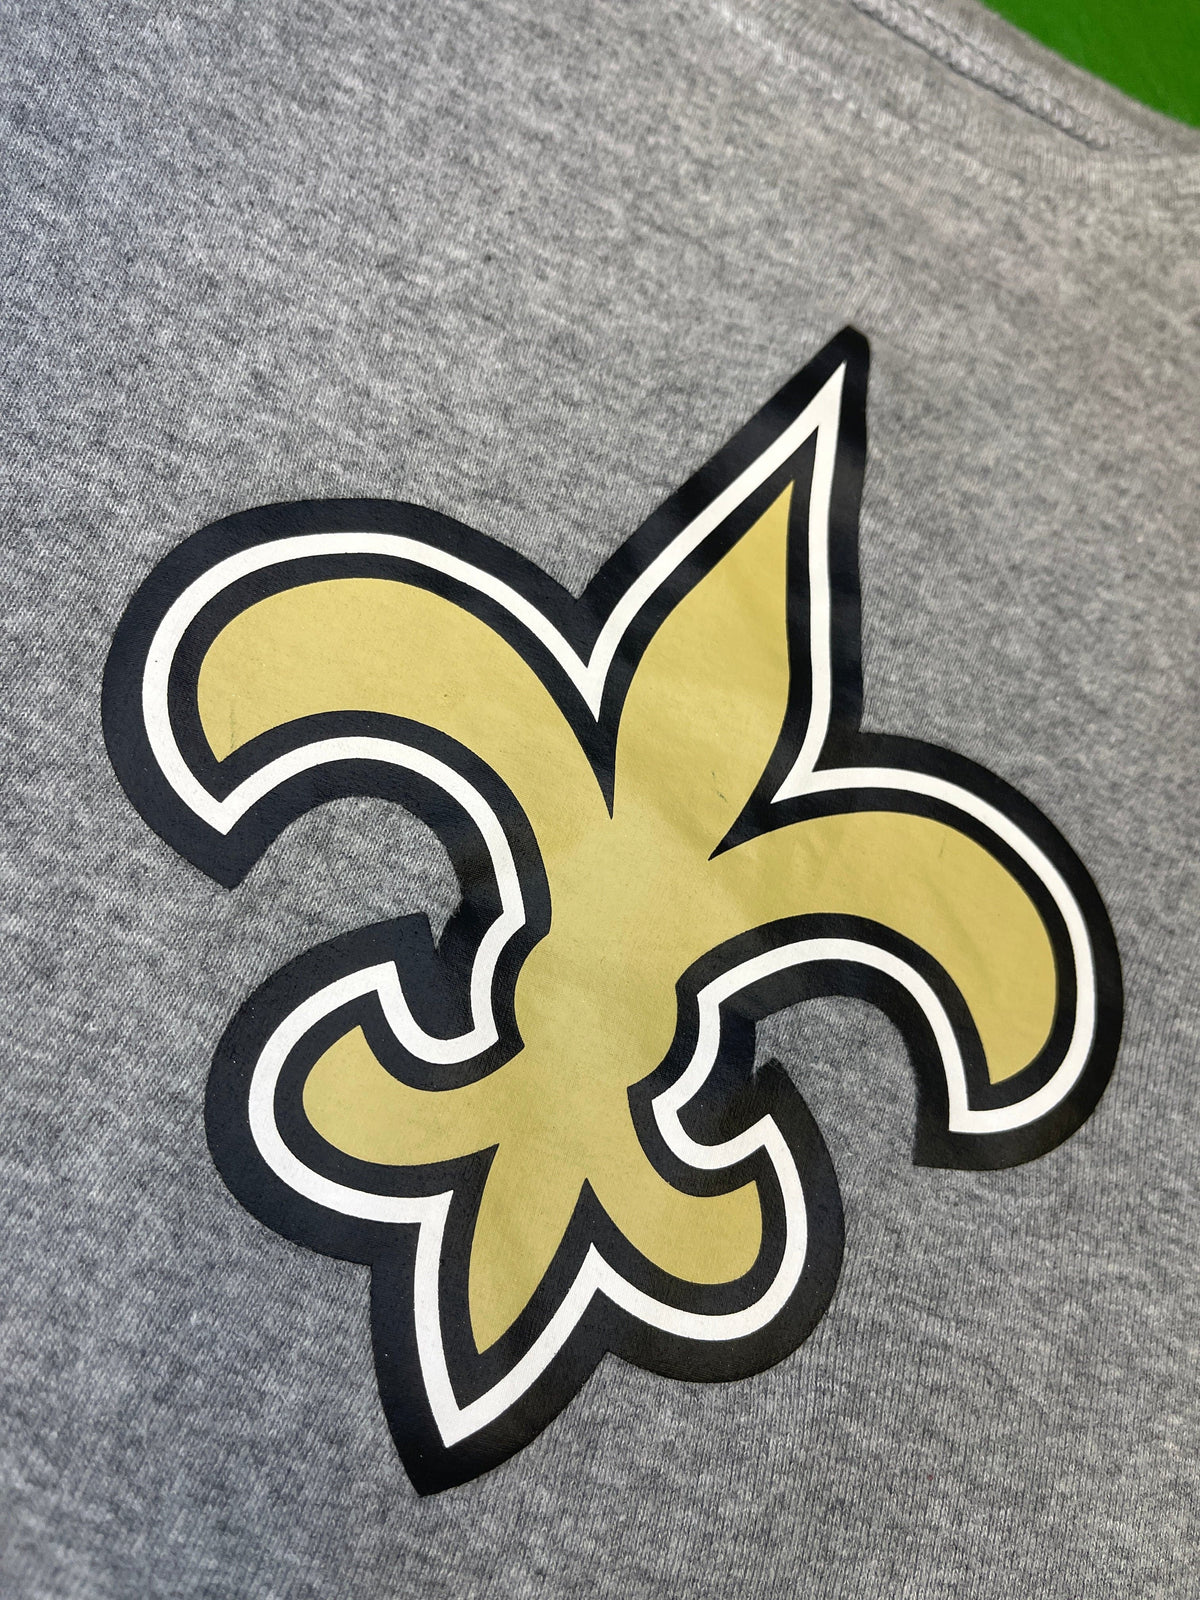 NFL New Orleans Saints Heathered Grey 100% Cotton T-Shirt Toddler 4T